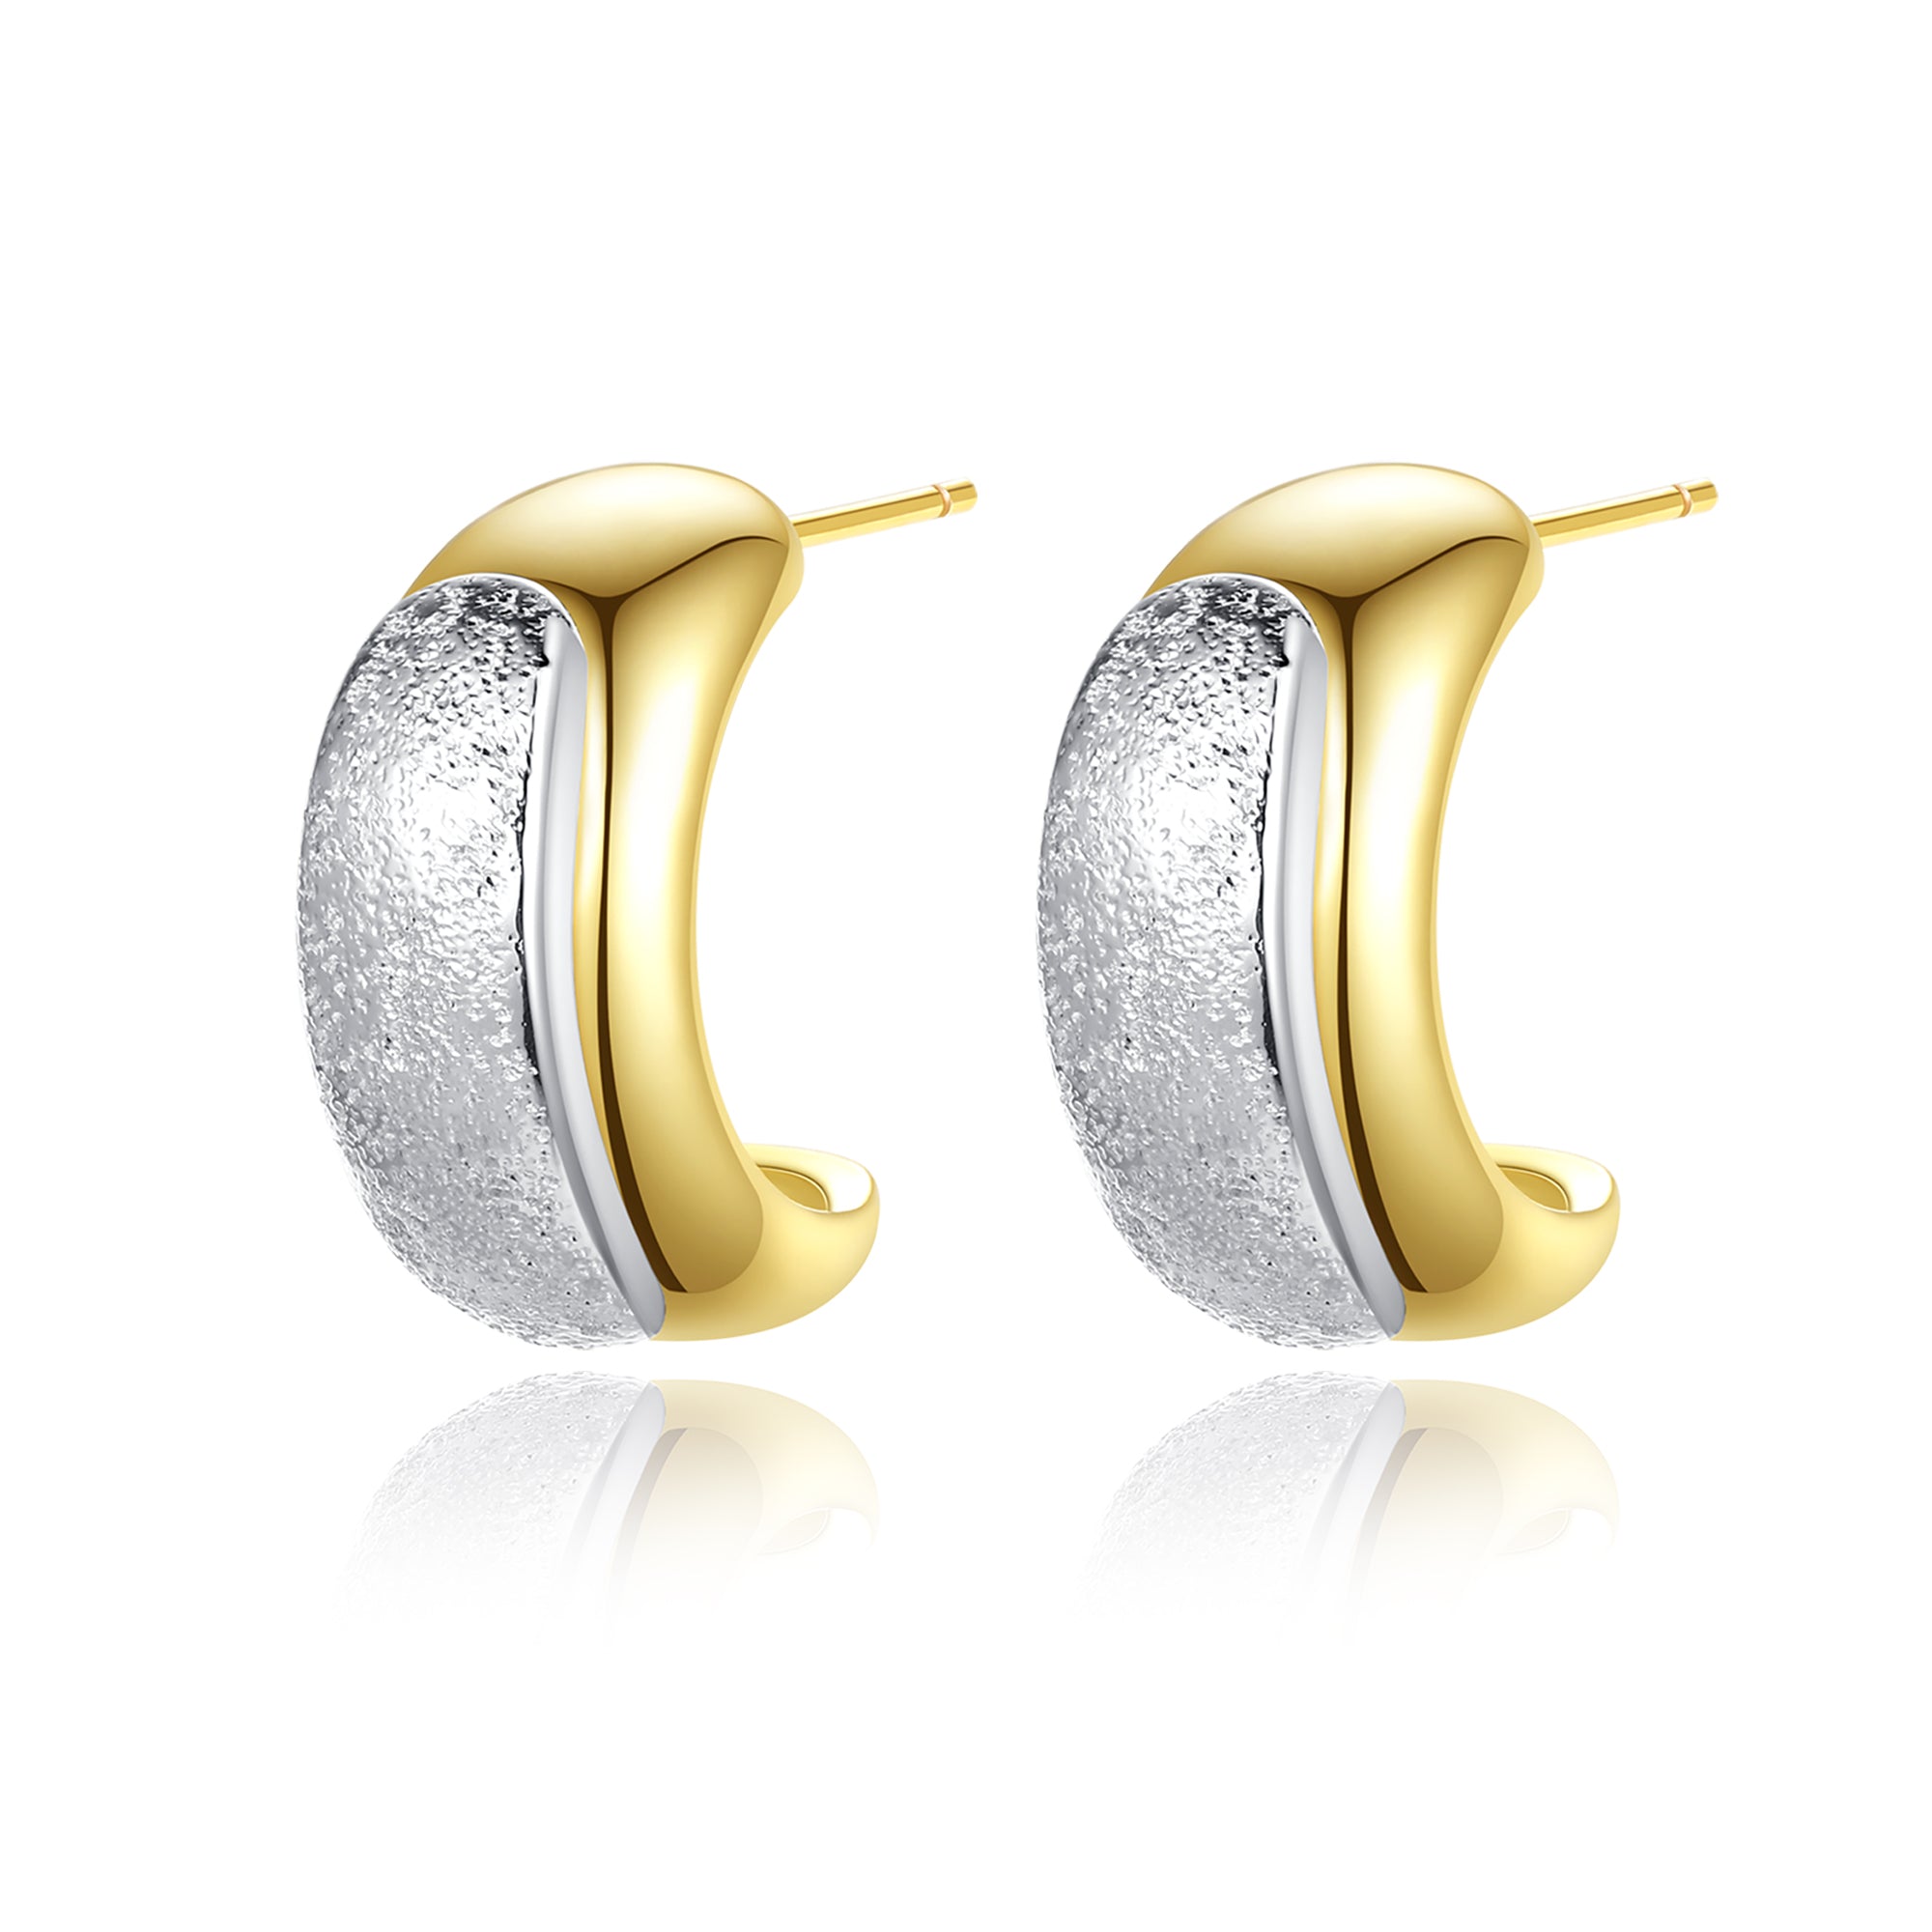 Classicharms Frosted and Matted Texture Two Tone Hoop Earrings - shopidPearl